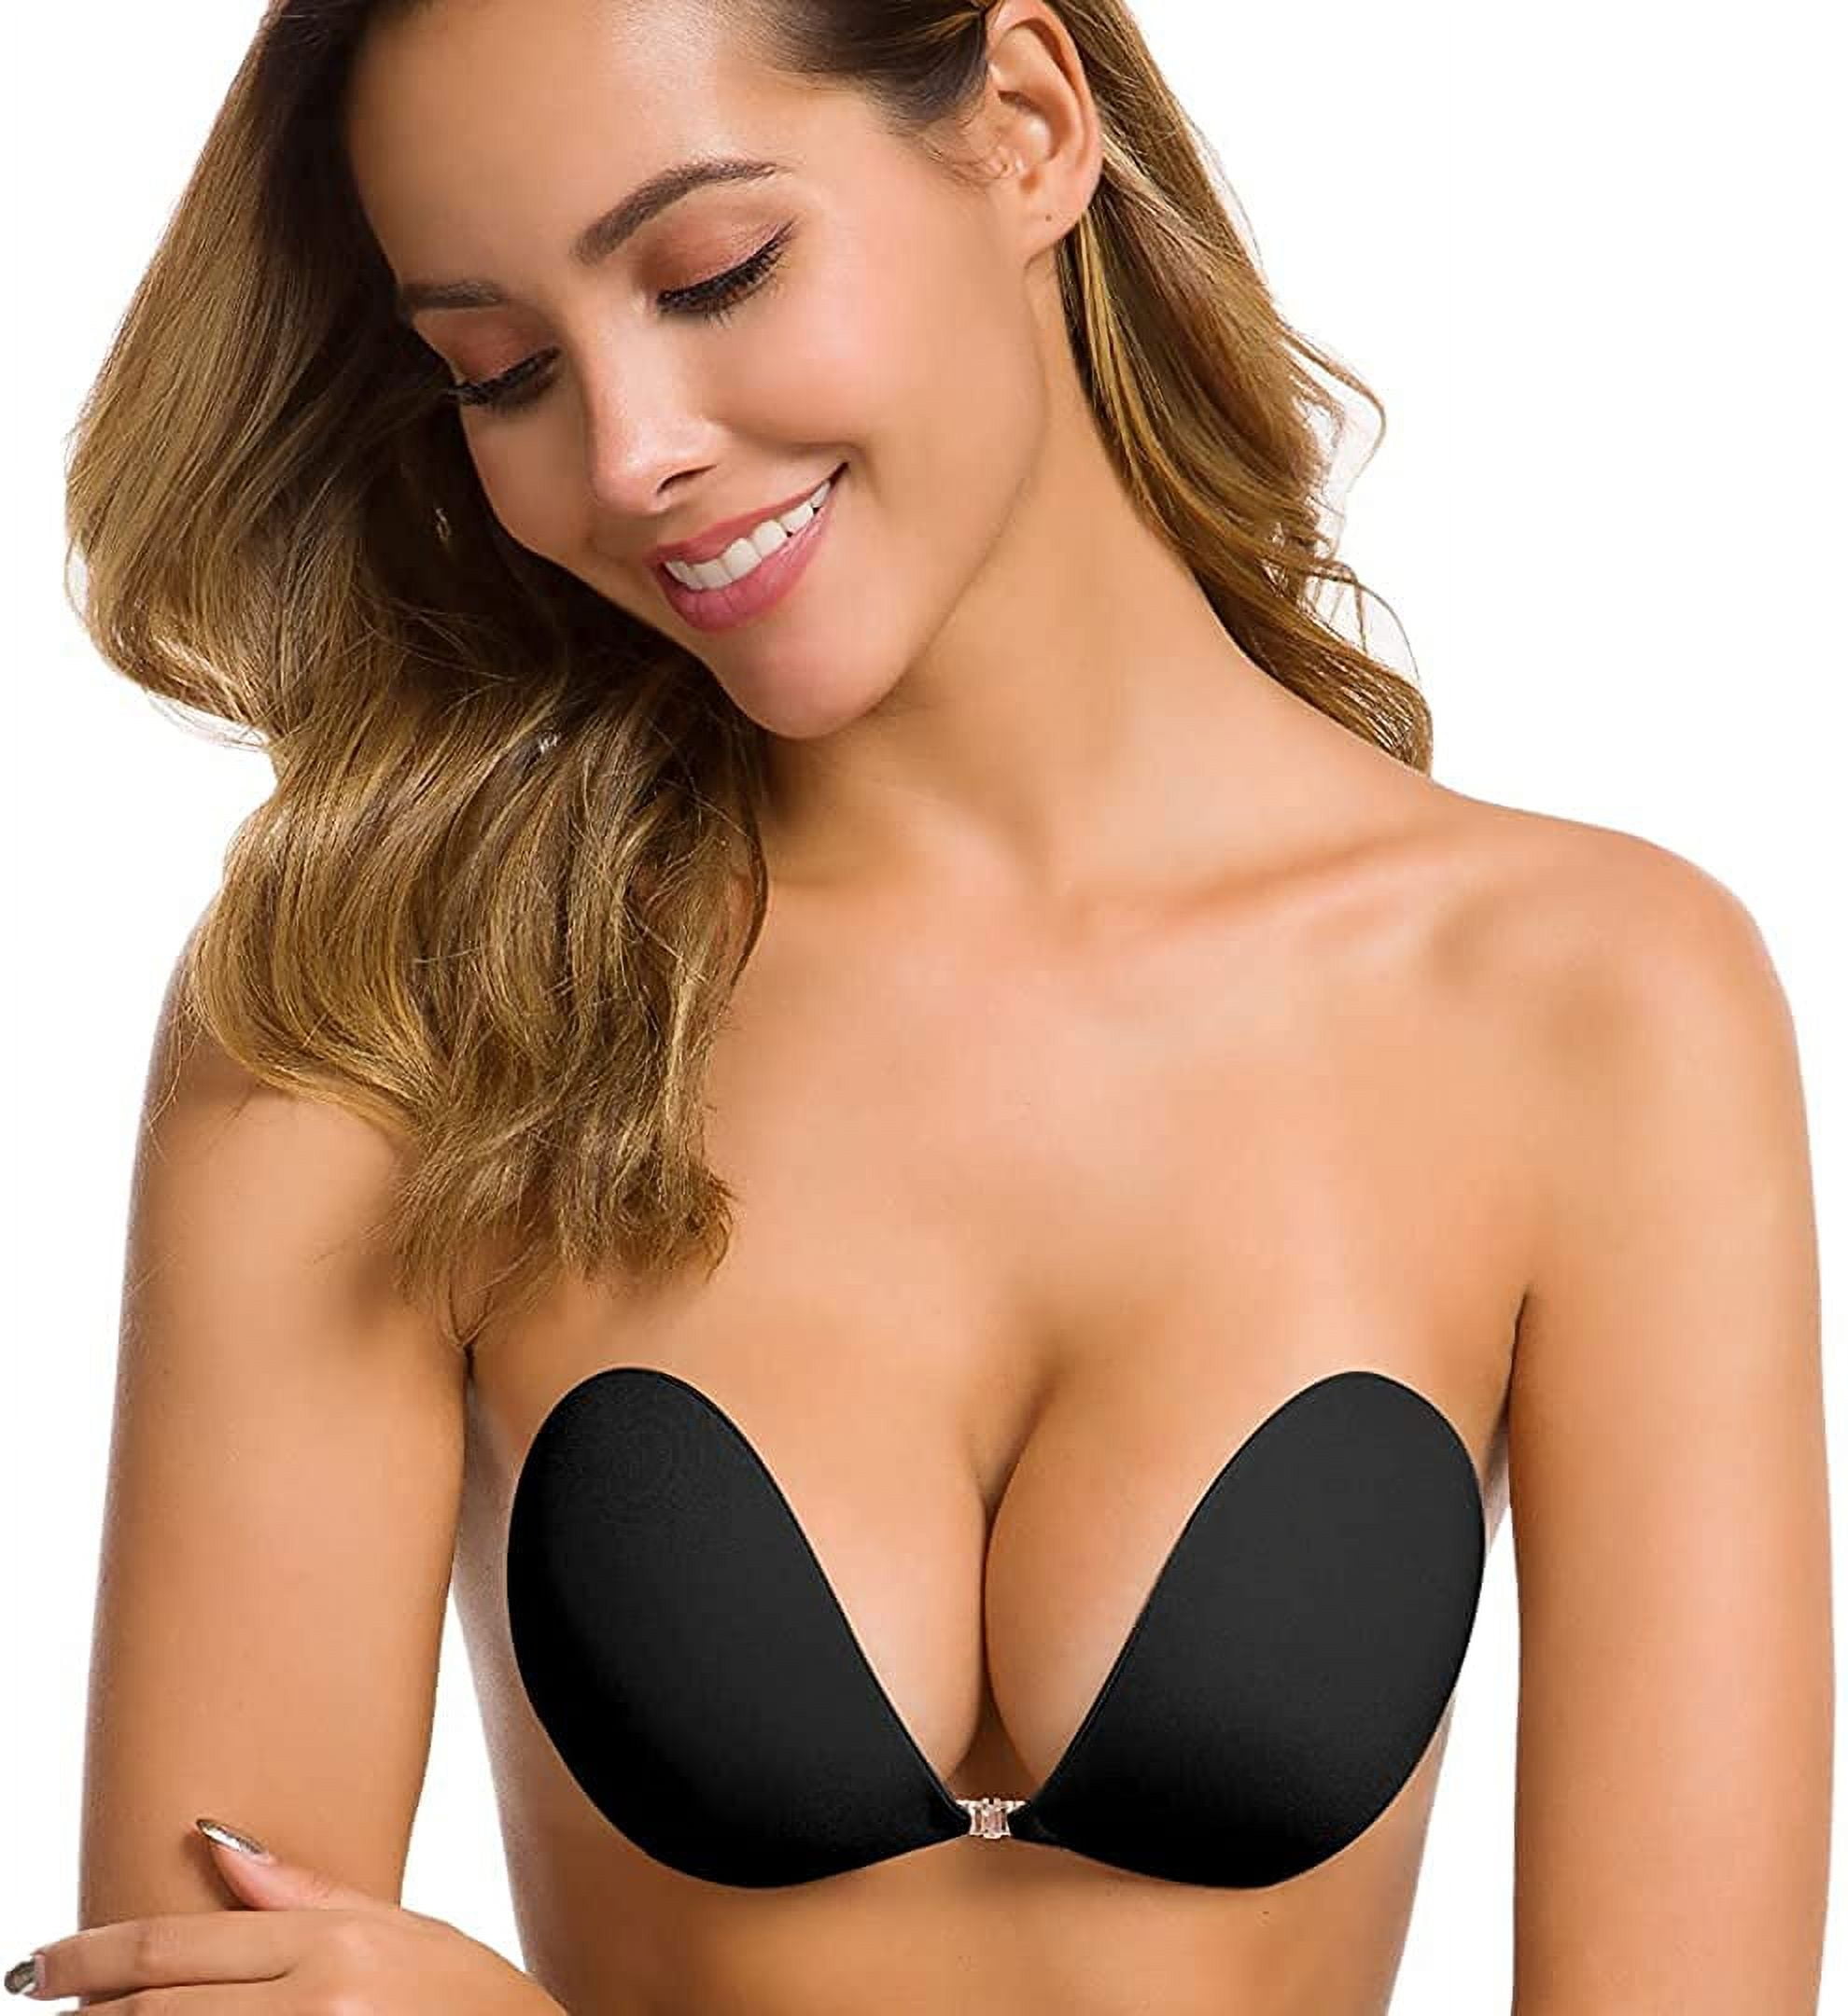 IMSHIE Adhesive Silicone Bra, Strapless Push-up Invisible Sticky